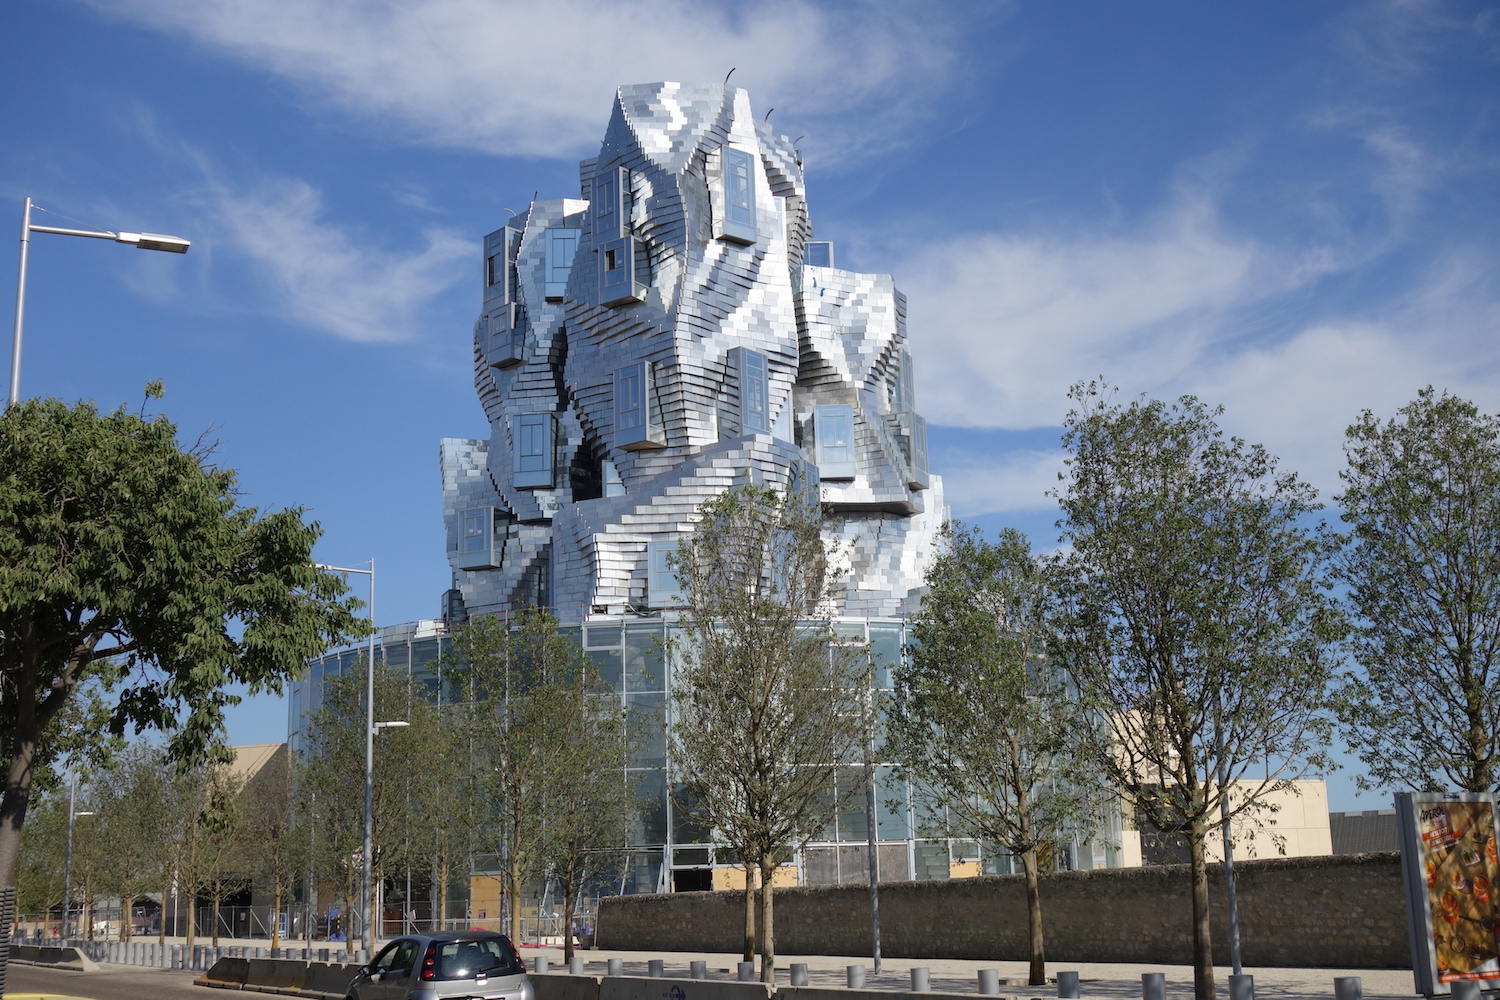 Luma Arles: Reserve Tickets to Visit Frank Gehry’s Second French Renaissance and Triumph.